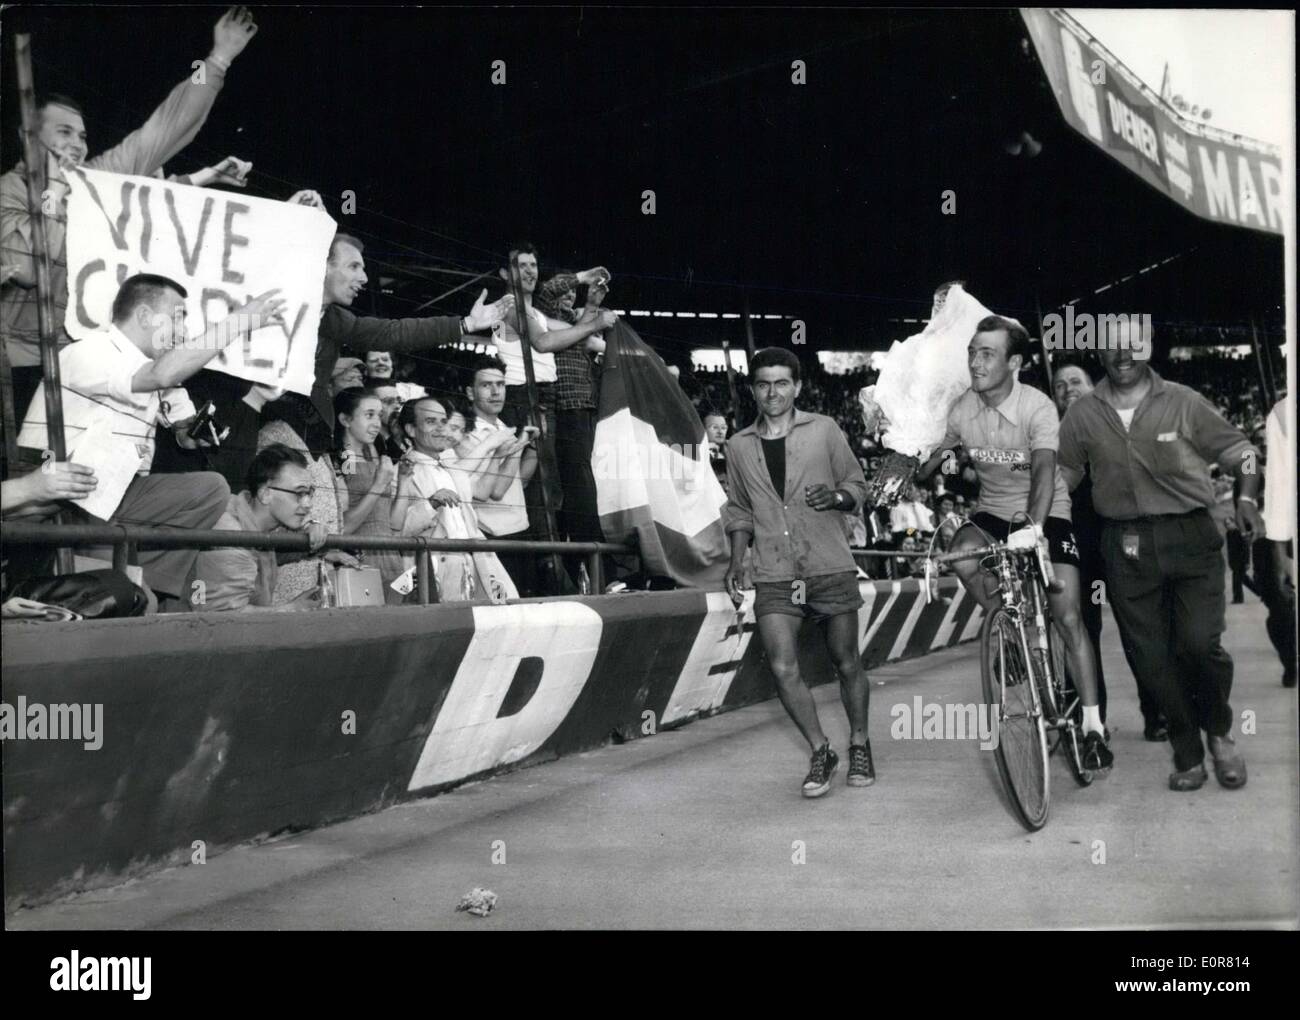 Jul. 19, 1958 - Tour de France Winner Charly Gaul Arriving at the Prince's Park Stock Photo